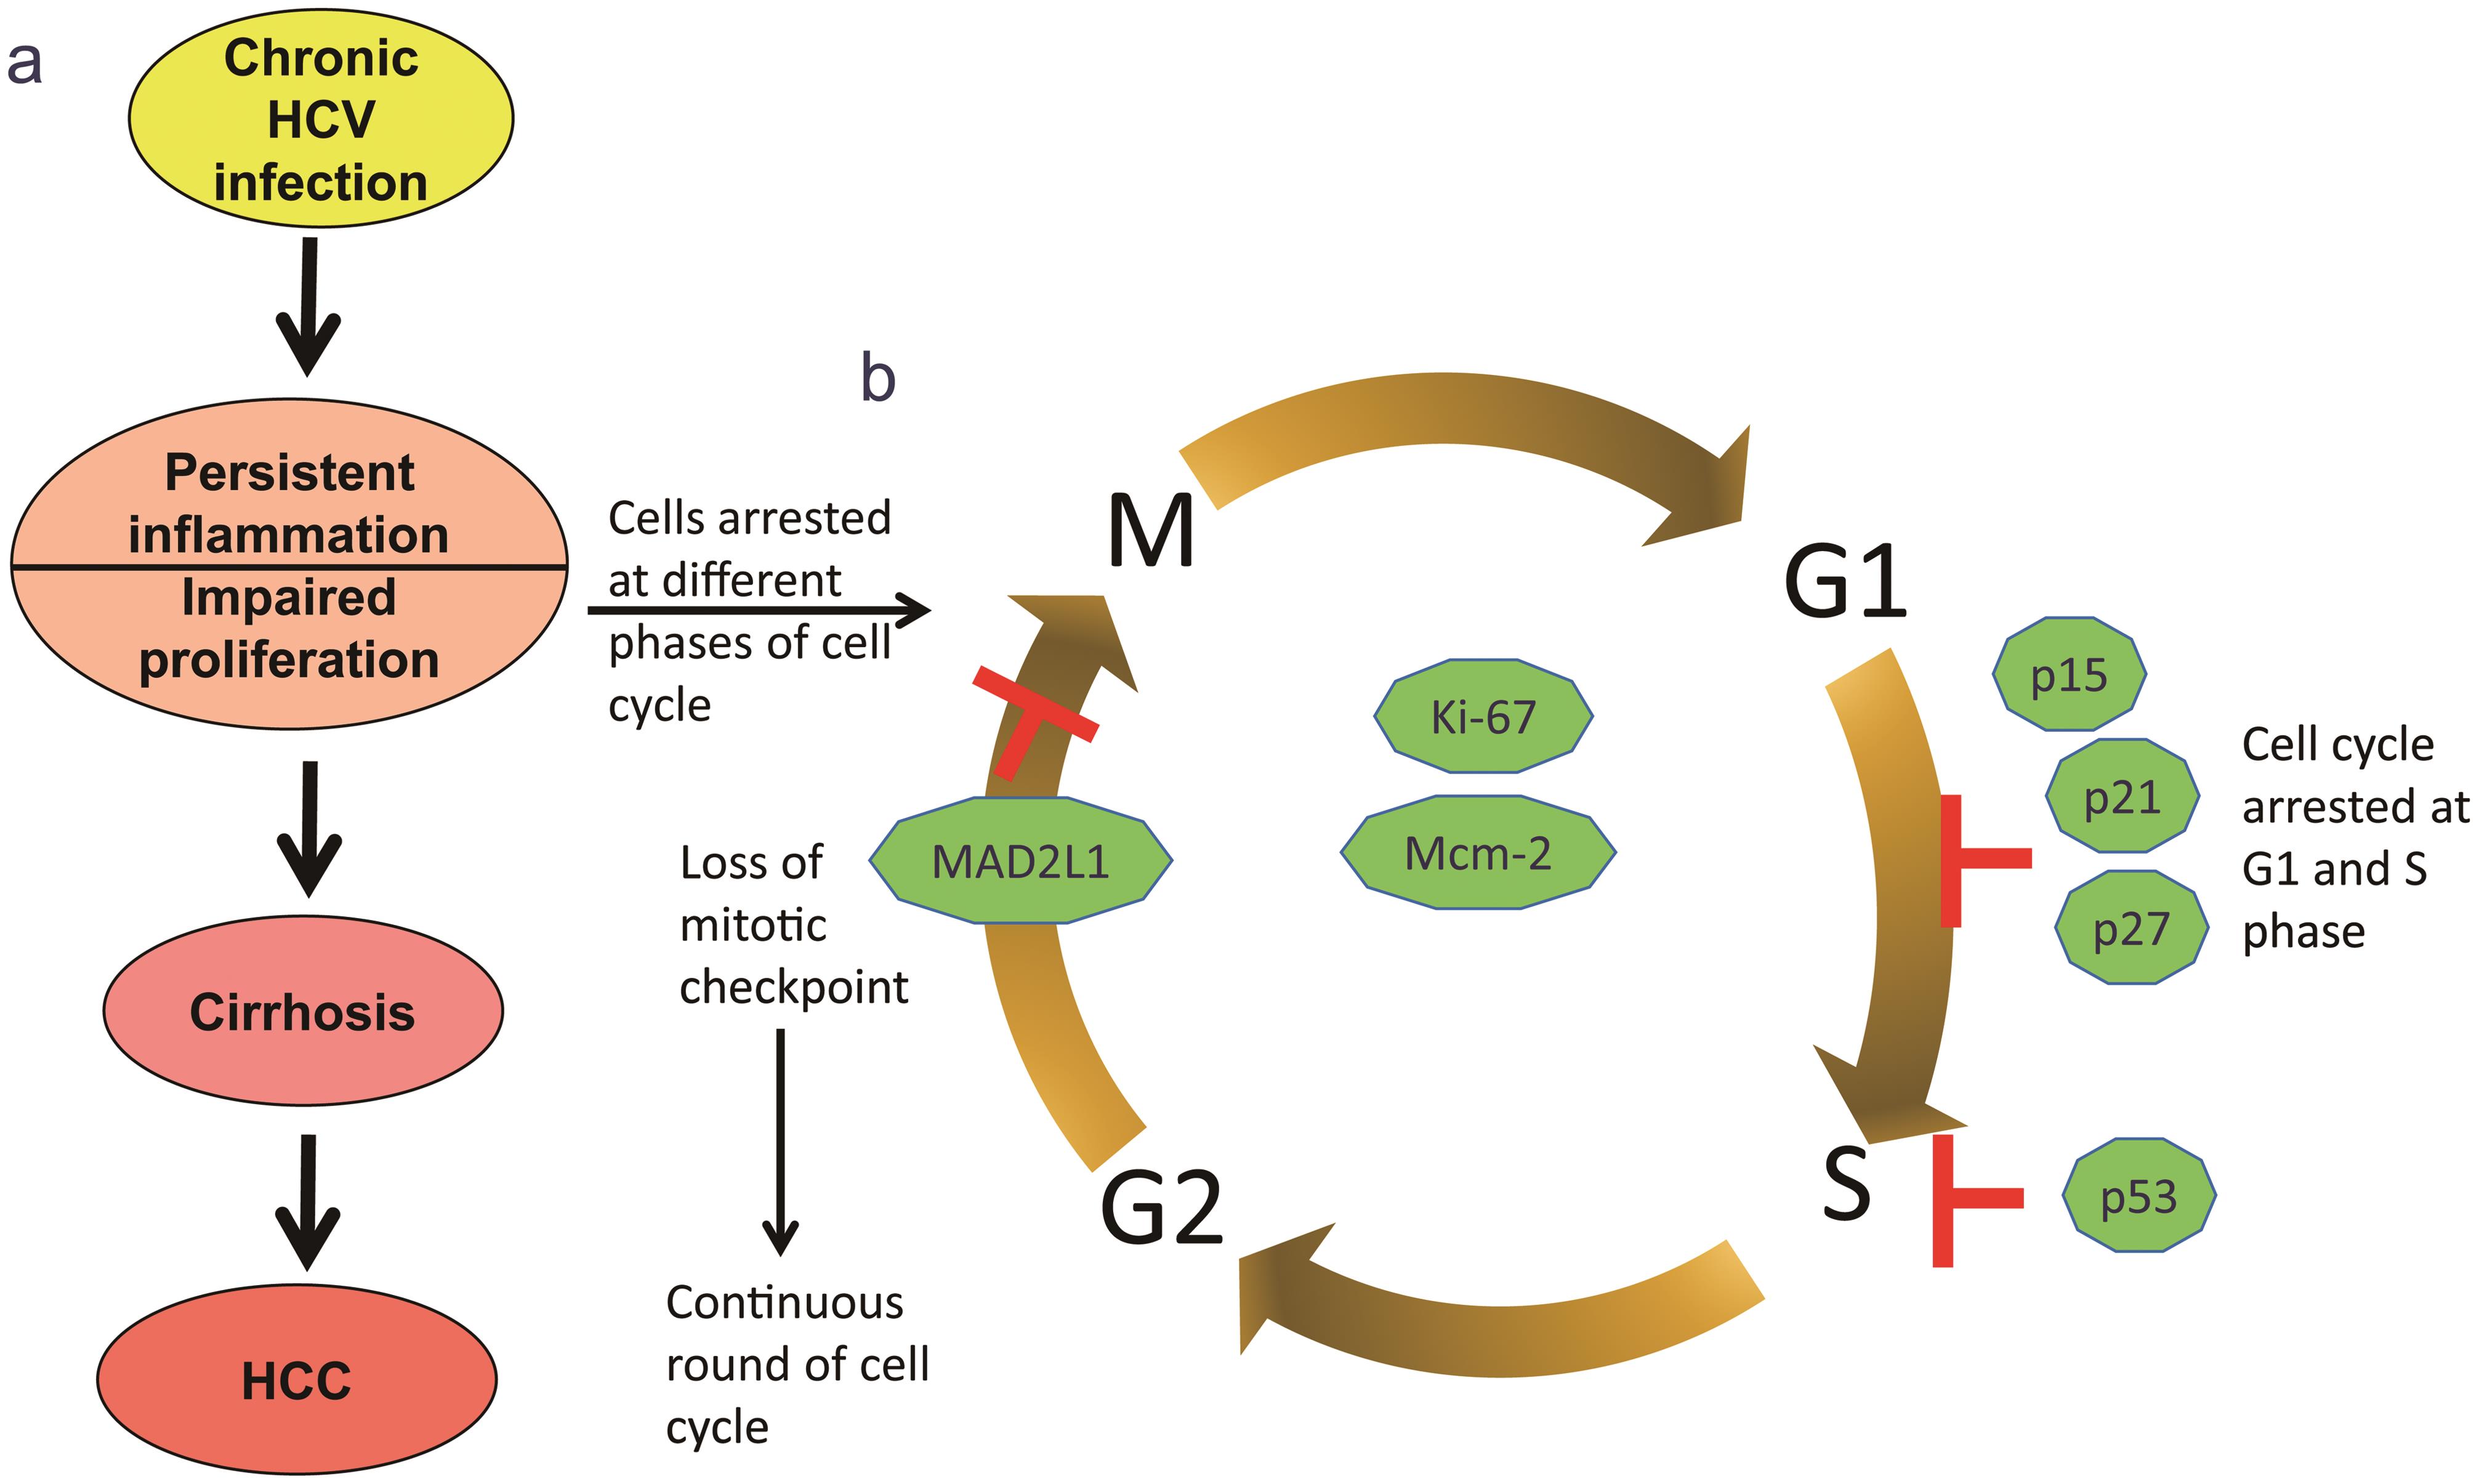 Involvement of cell cycle disruptions in HCV-associated disease progression.